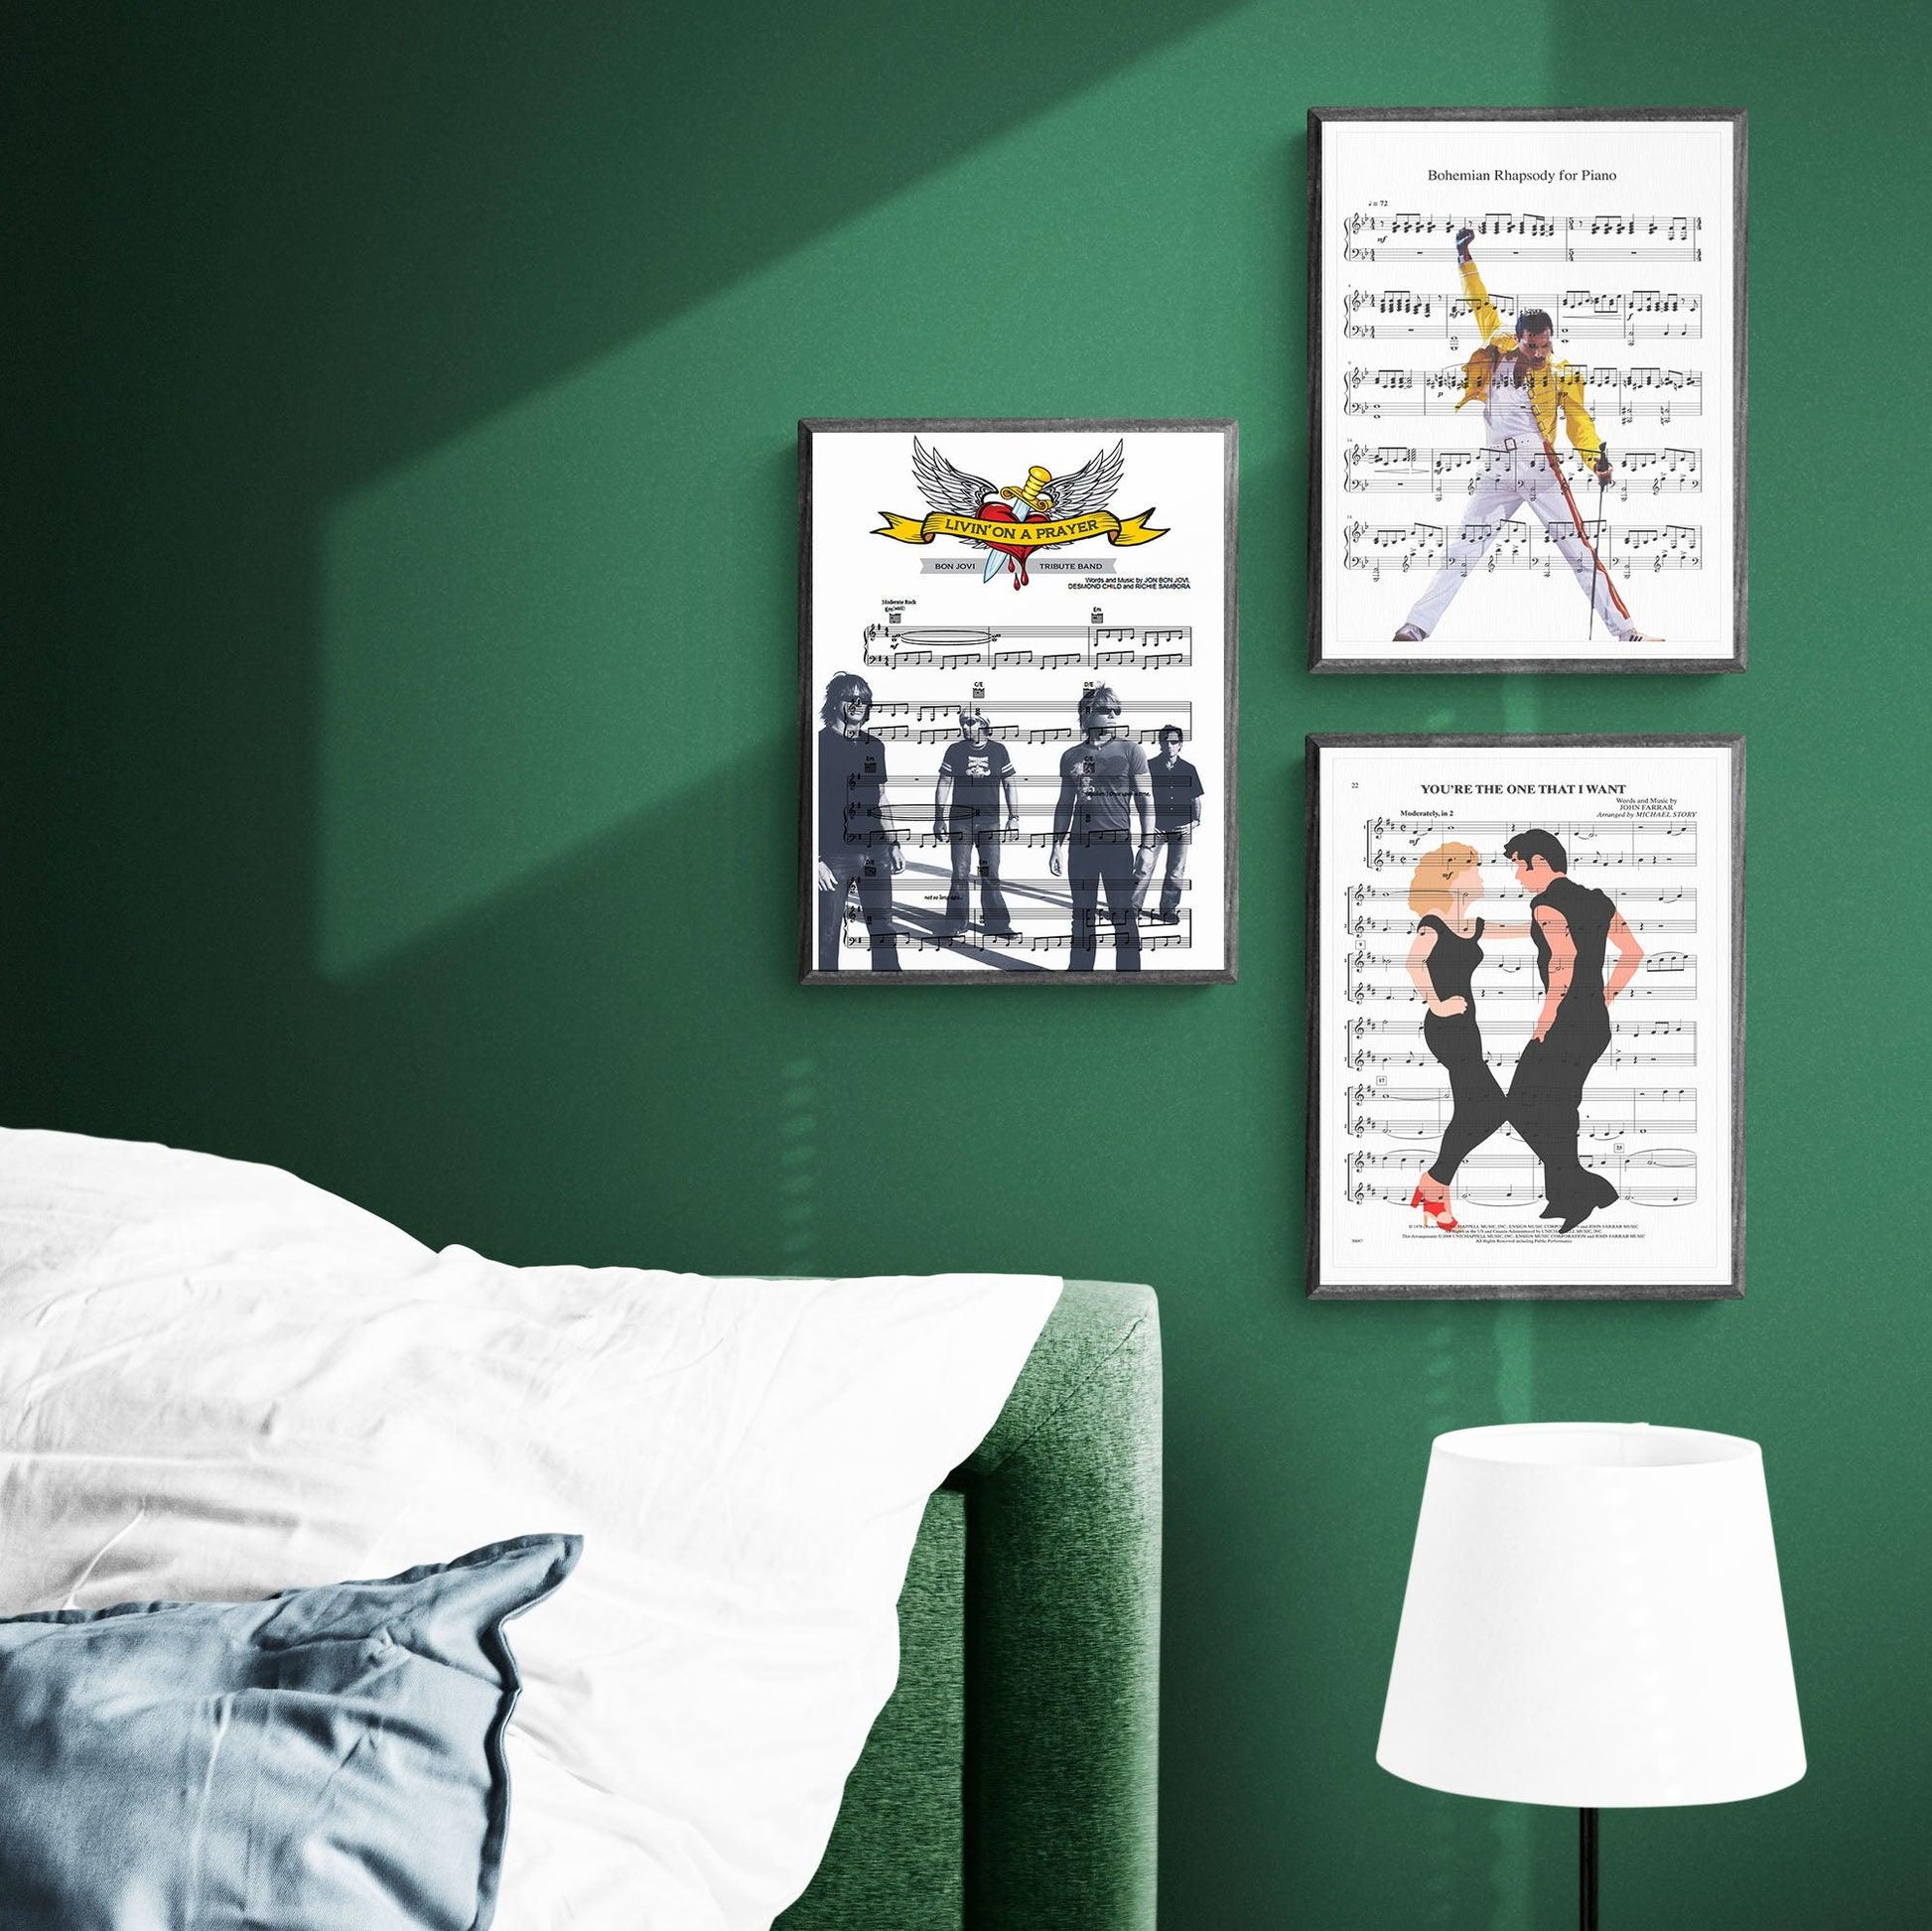 Bon Jovi - Livin' On A Prayer Music Print | Song Music Sheet Notes Print Everyone has a favorite song especially Bon Jovi - Livin' On A Prayer, and now you can show the score as printed staff. The personal favorite song sheet print shows the song chosen as the score. 